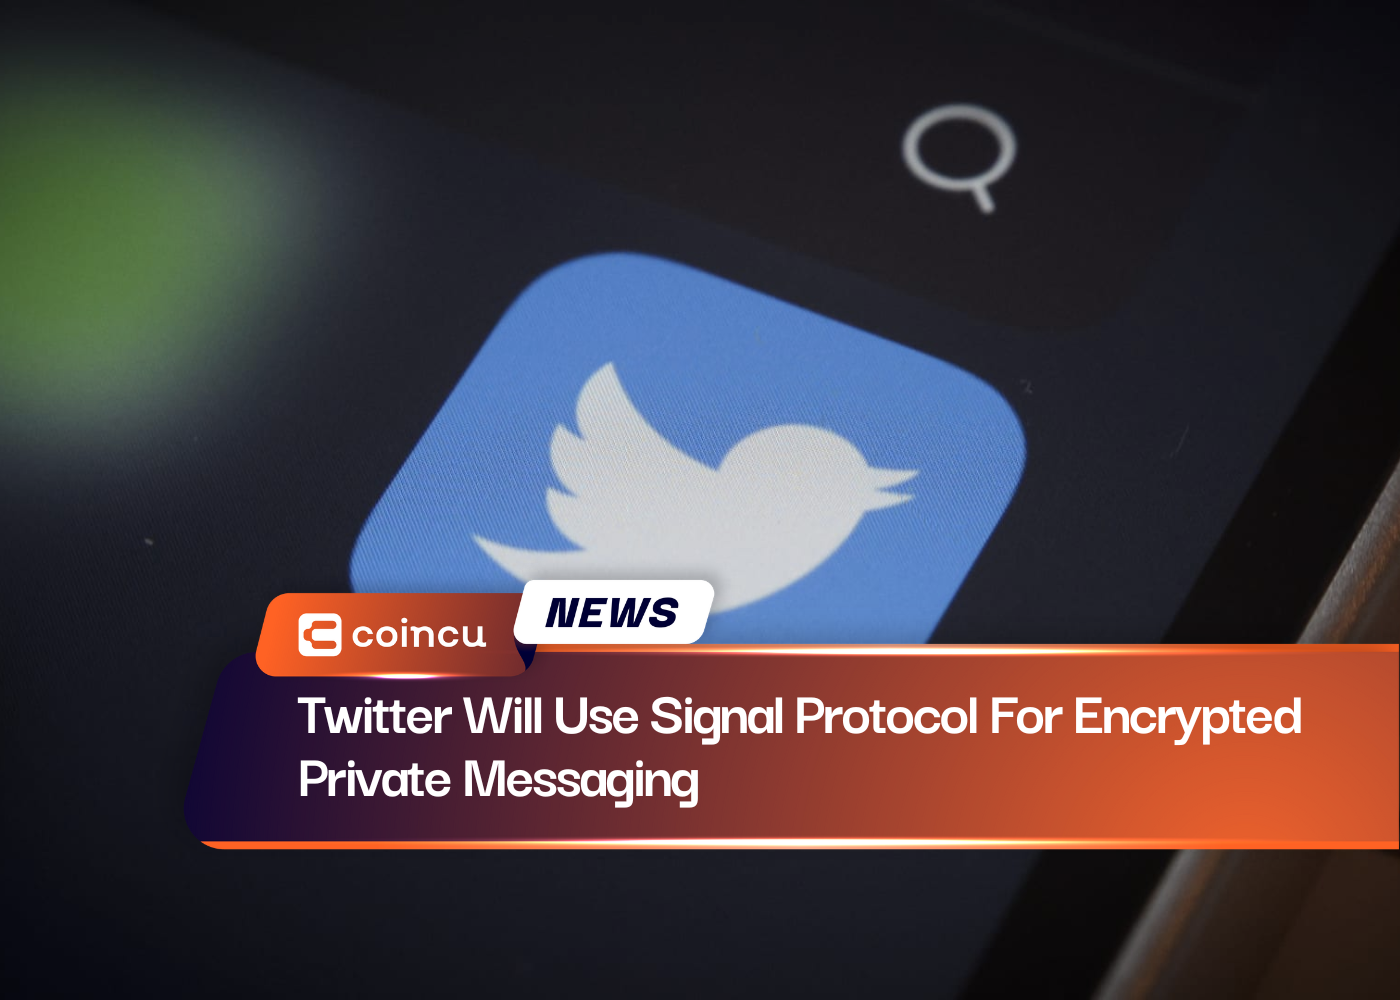 Twitter Will Use Signal Protocol For Encrypted Private Messaging